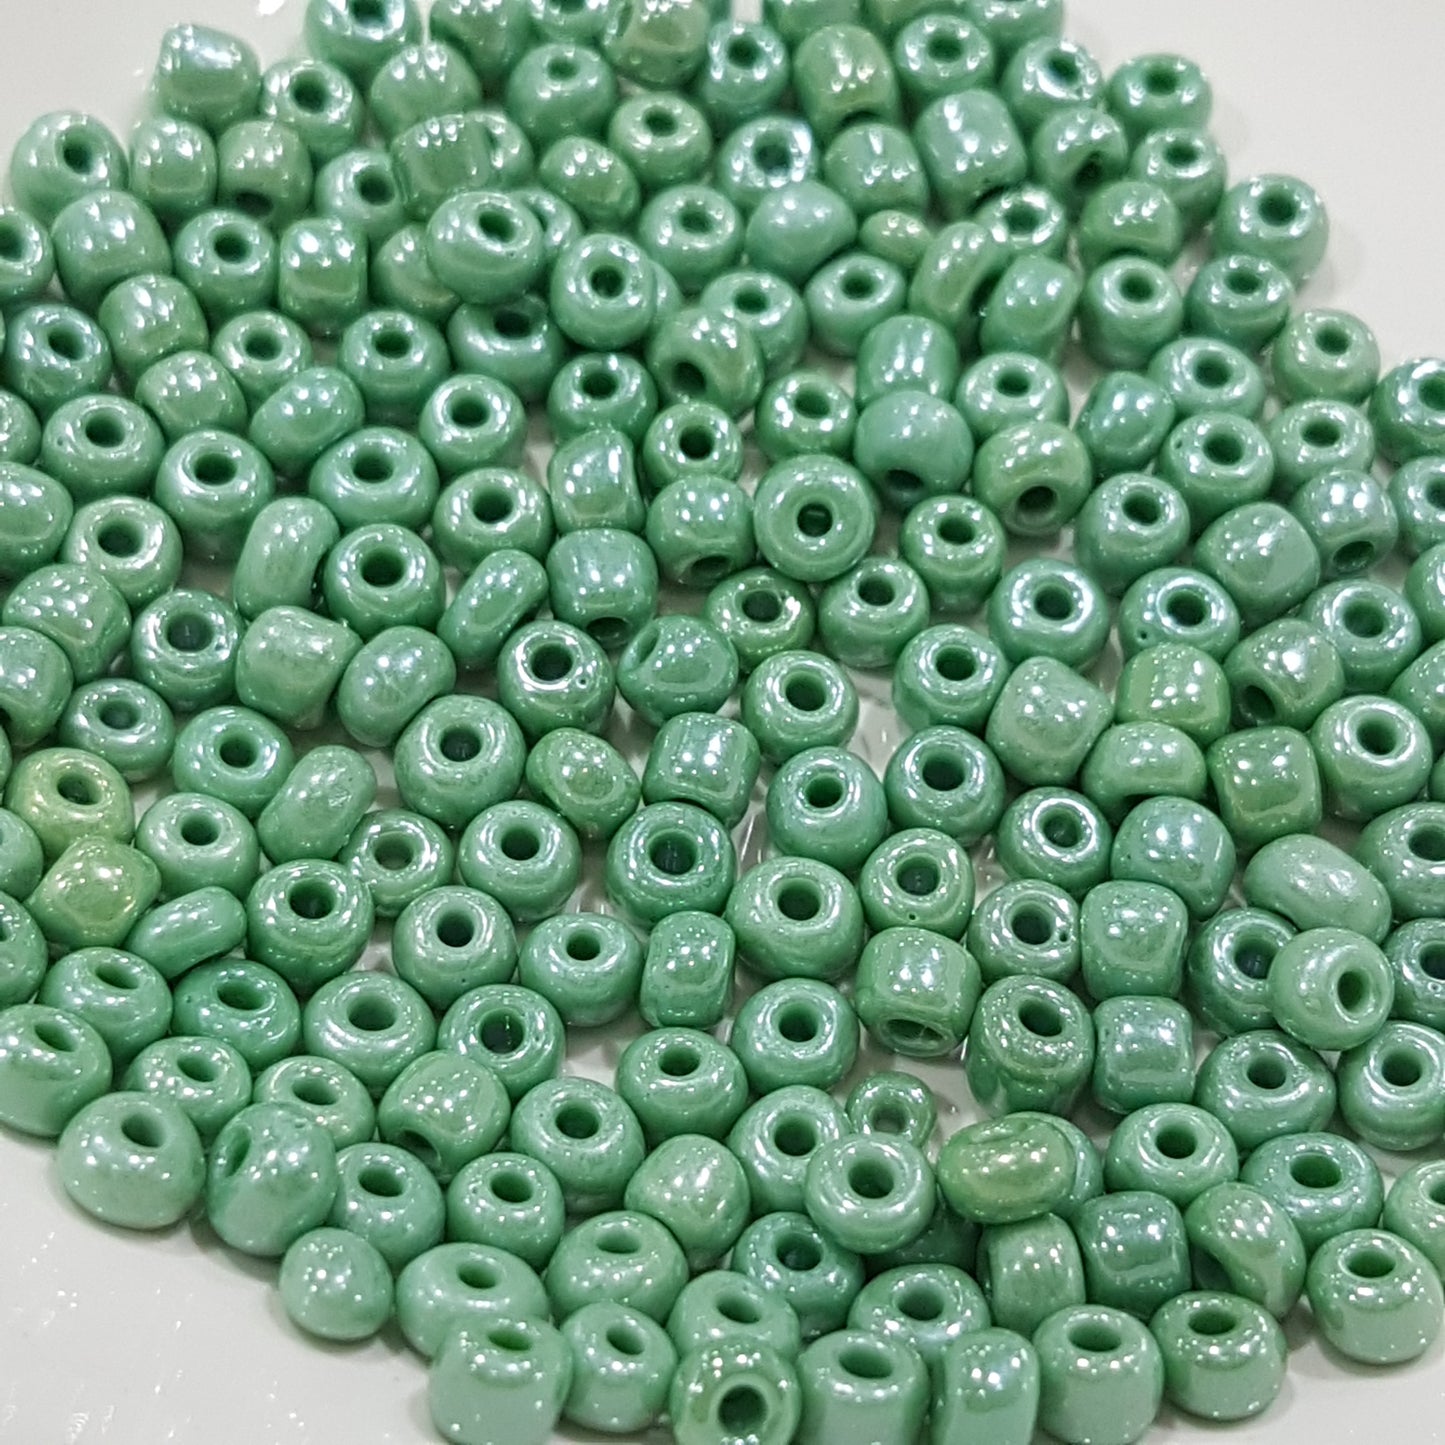 15g 3mm Pearl Green Seed Beads